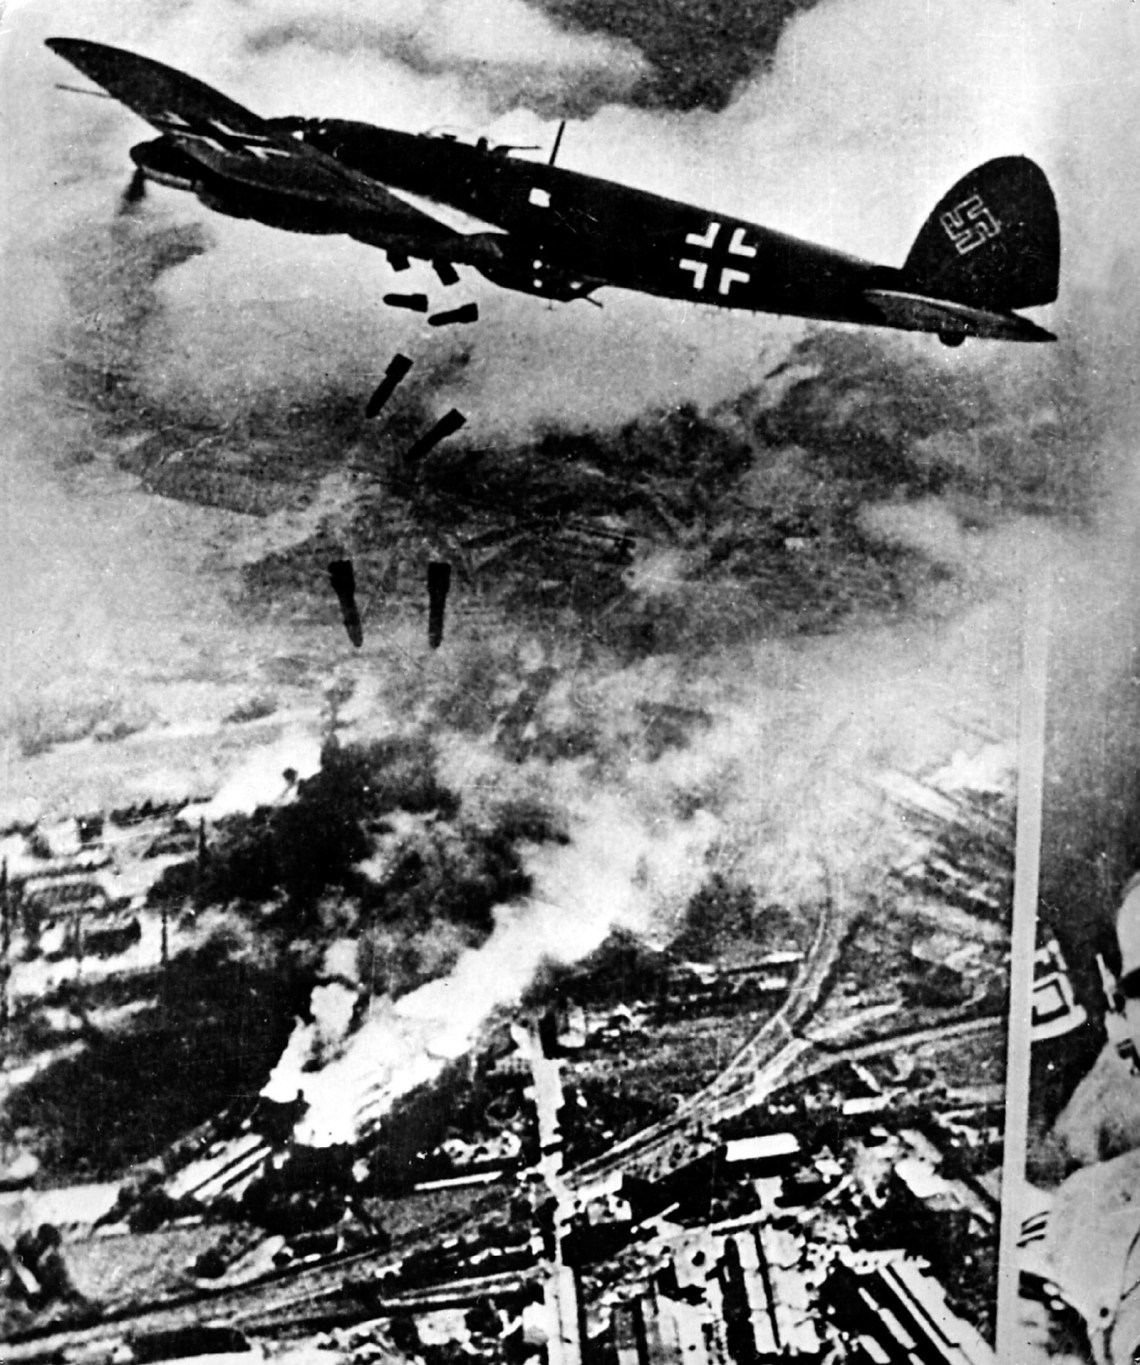 A German bomber over Warsaw